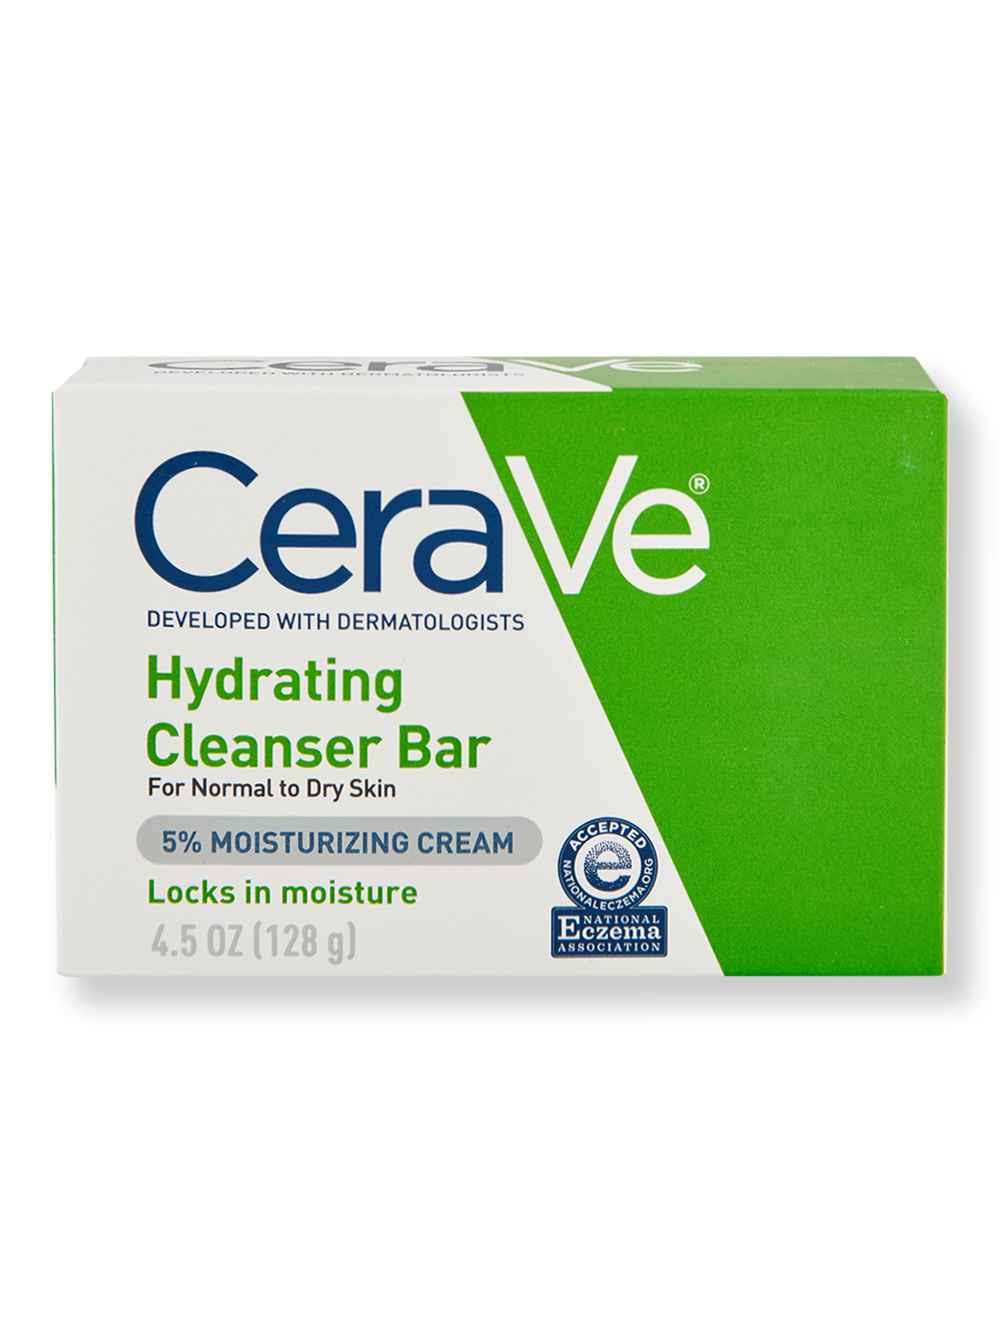 CeraVe Hydrating Cleansing Bar - 4.5oz